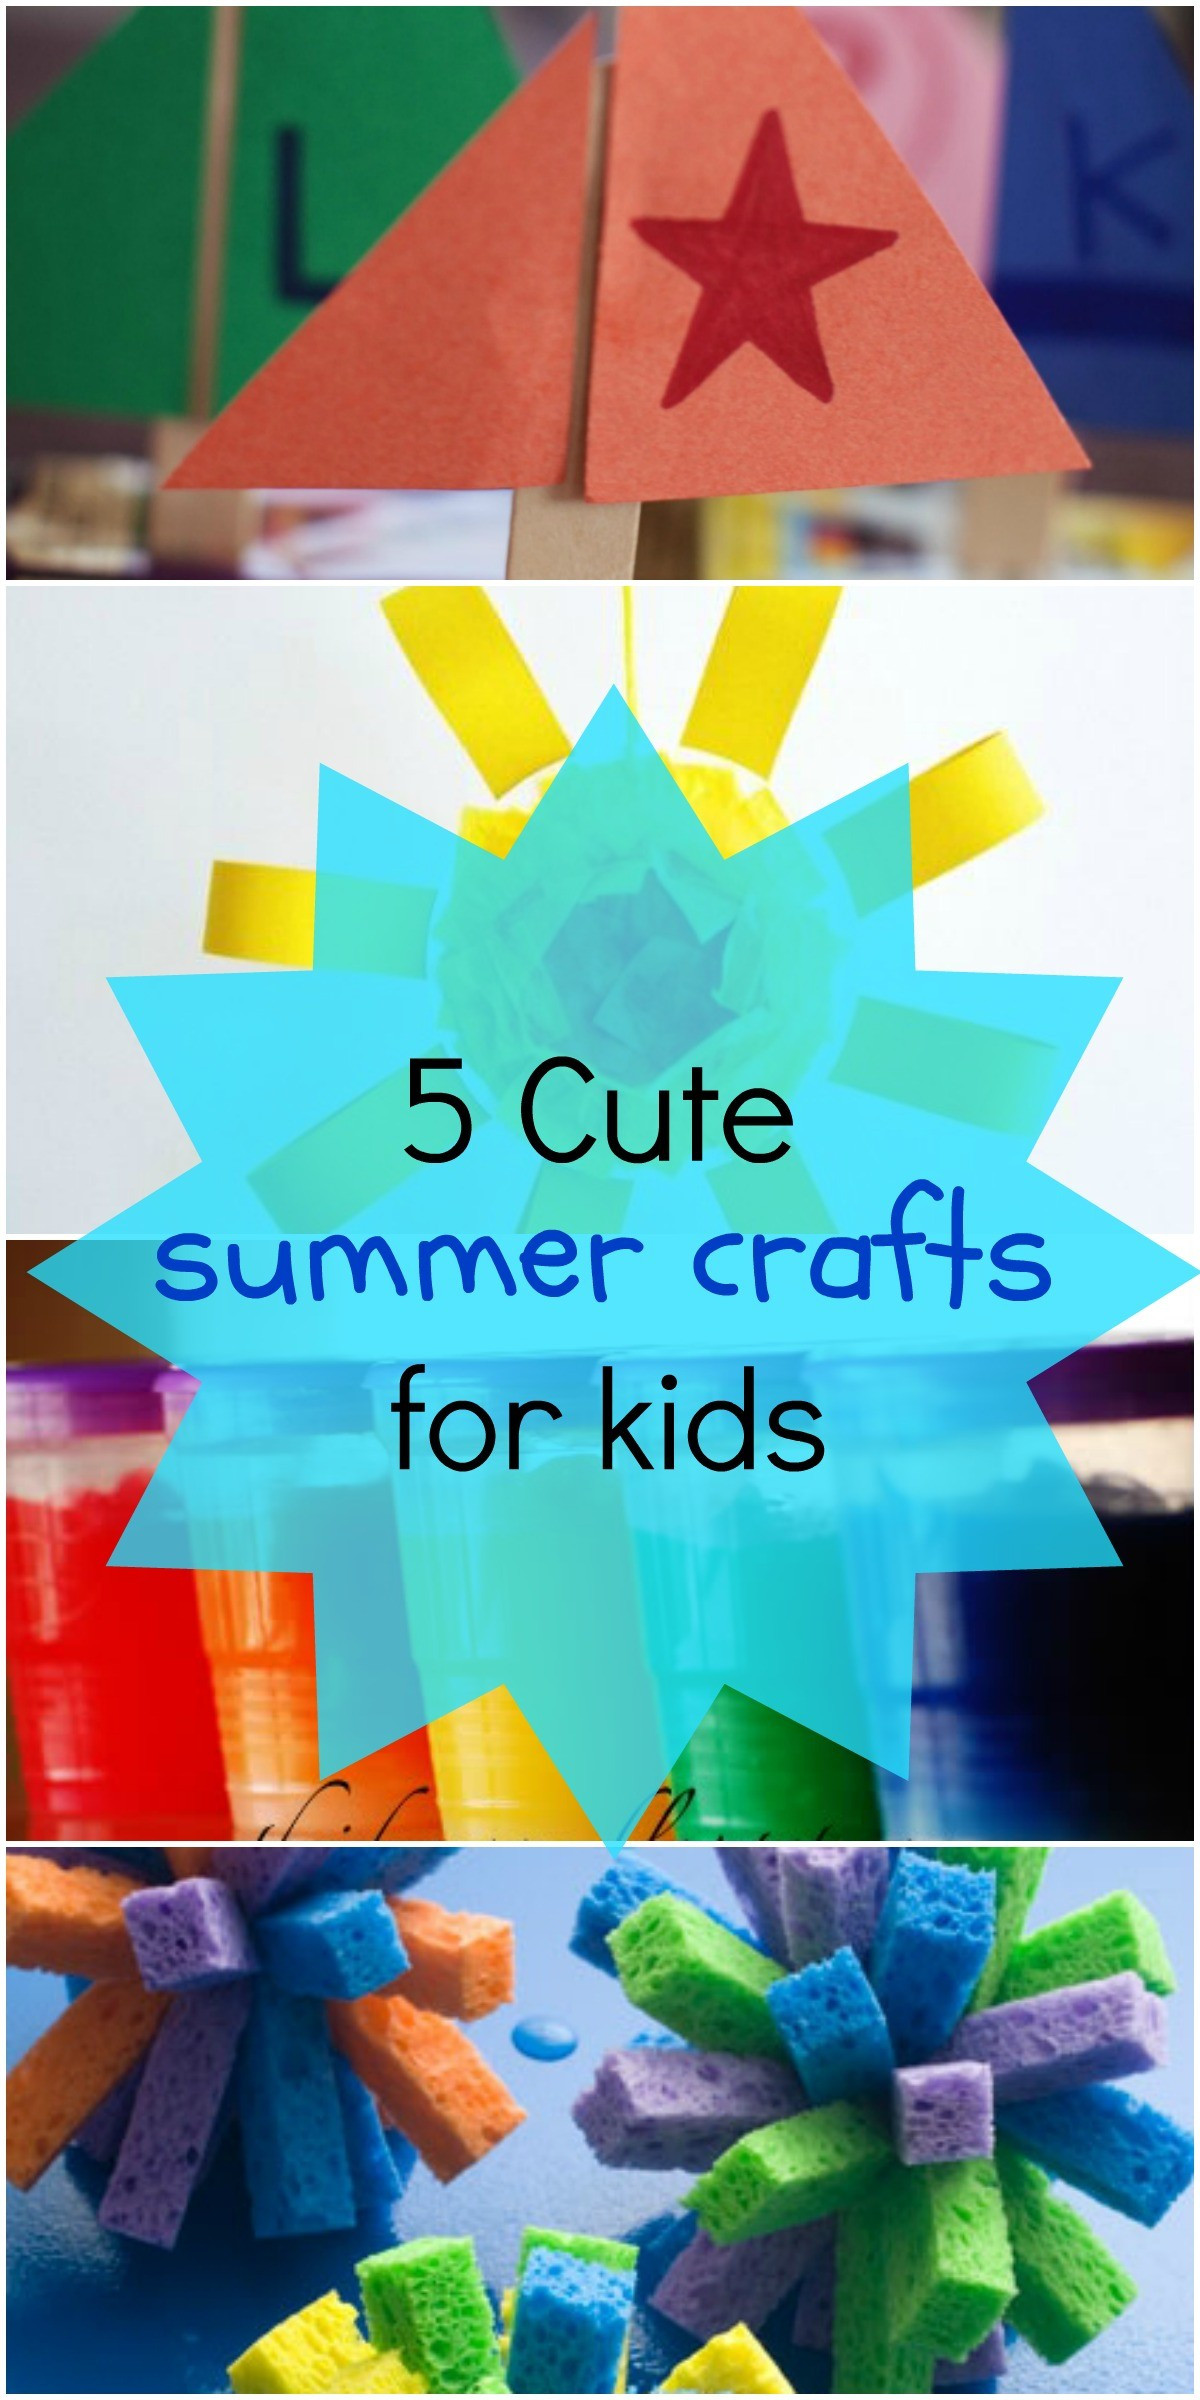 Project Ideas For Kids
 5 Fun Summer Crafts for Kids Love These Art Project Ideas